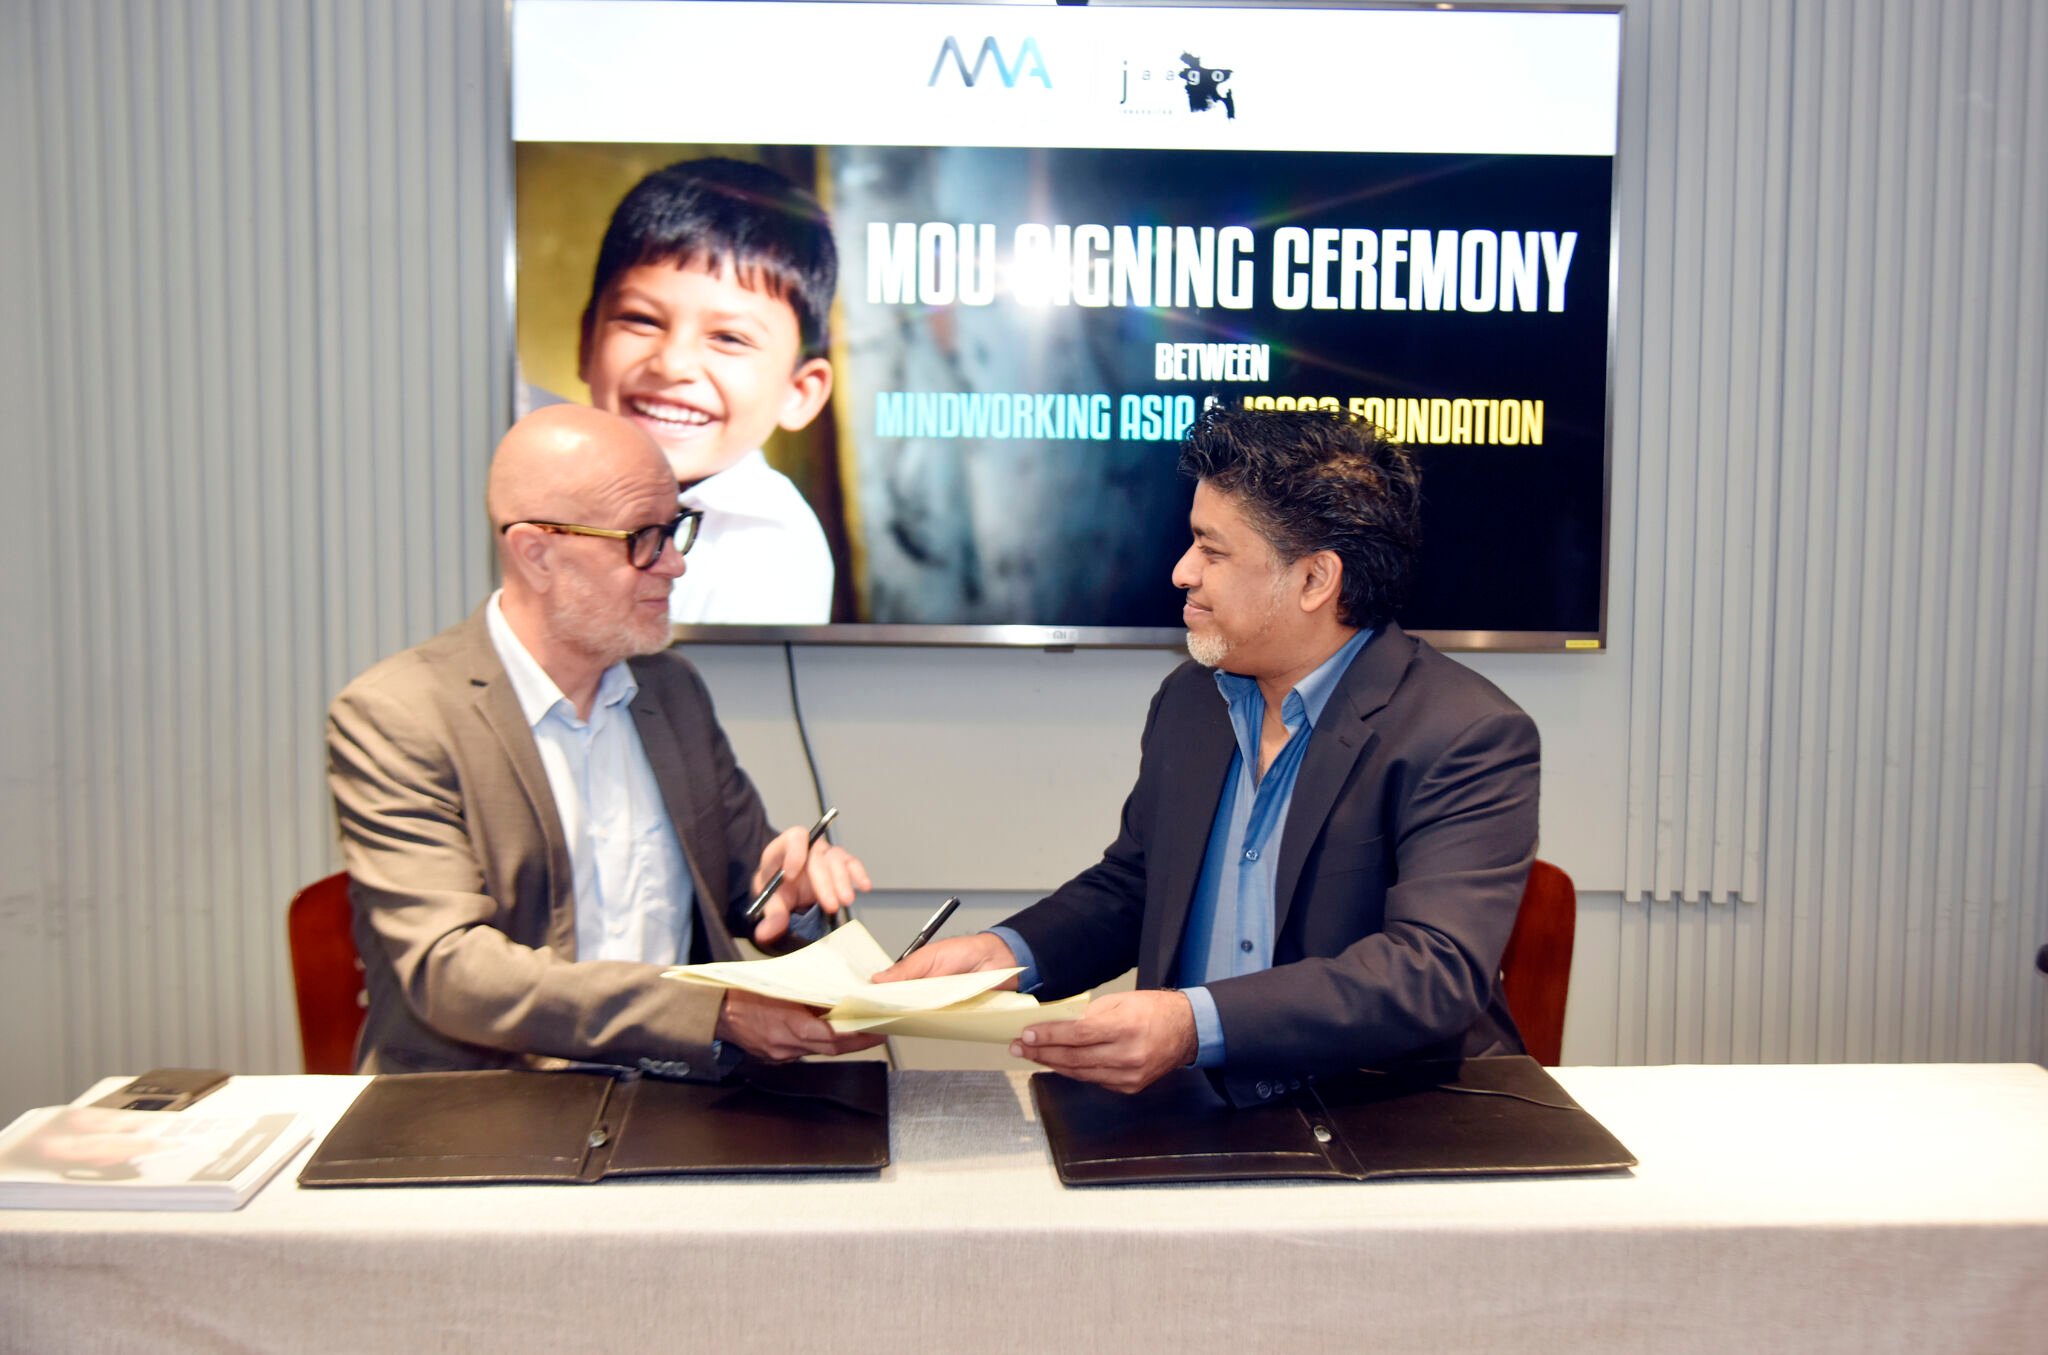 Mindworking Asia Signs MOU with JAAGO Foundation to Support Education